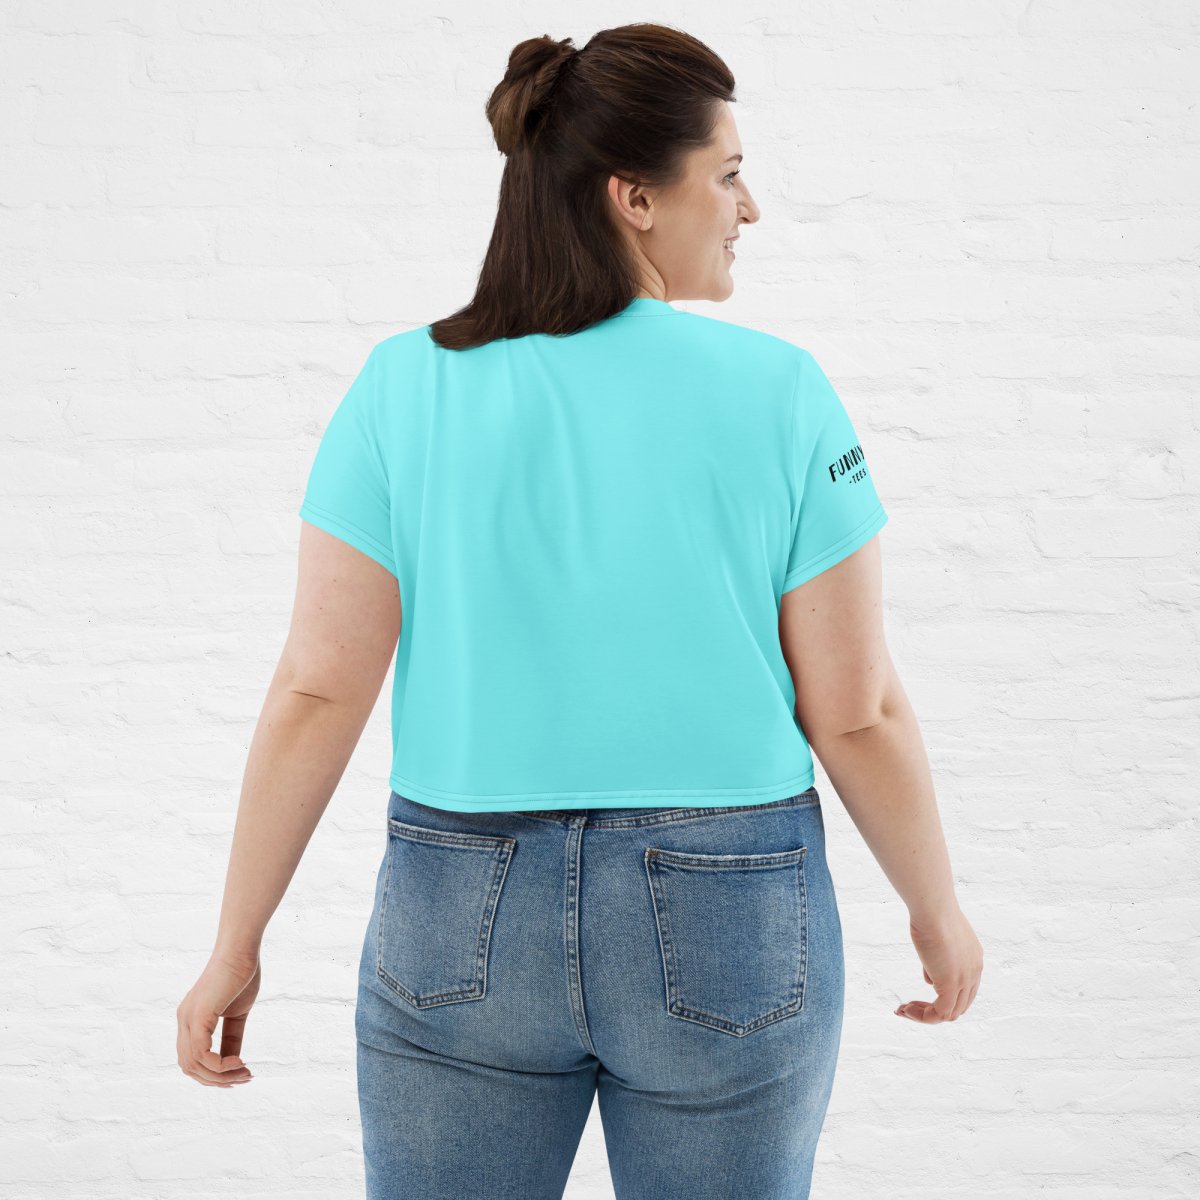 Lab in Turquoise Crop Top - Funny Nikko